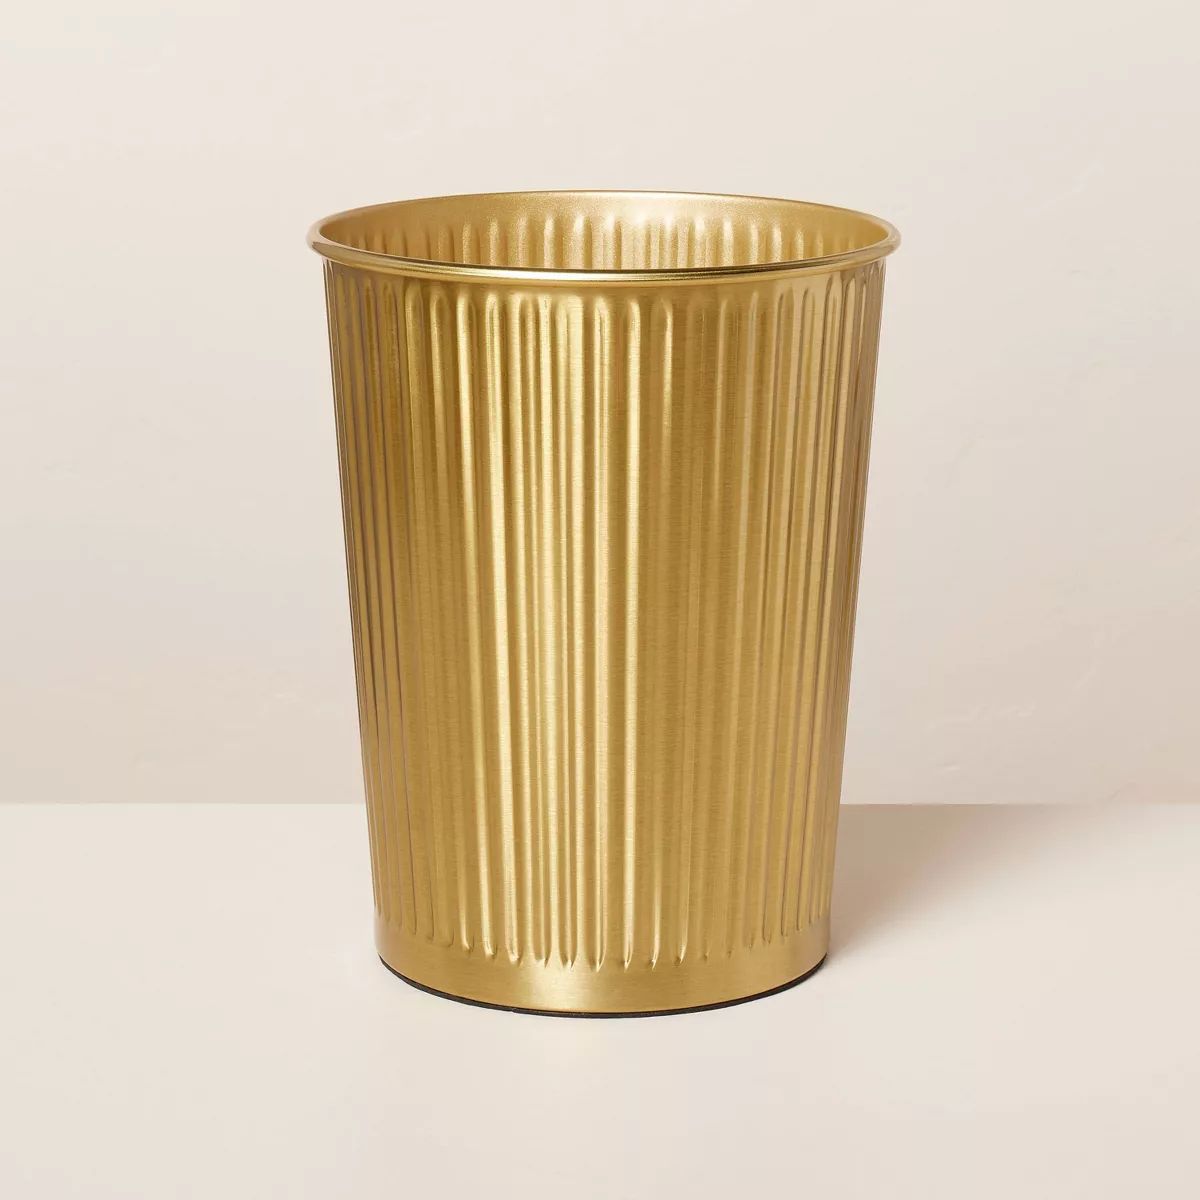 2.4gal Fluted Brass Bathroom Wastebasket Antique Finish - Hearth & Hand™ with Magnolia | Target